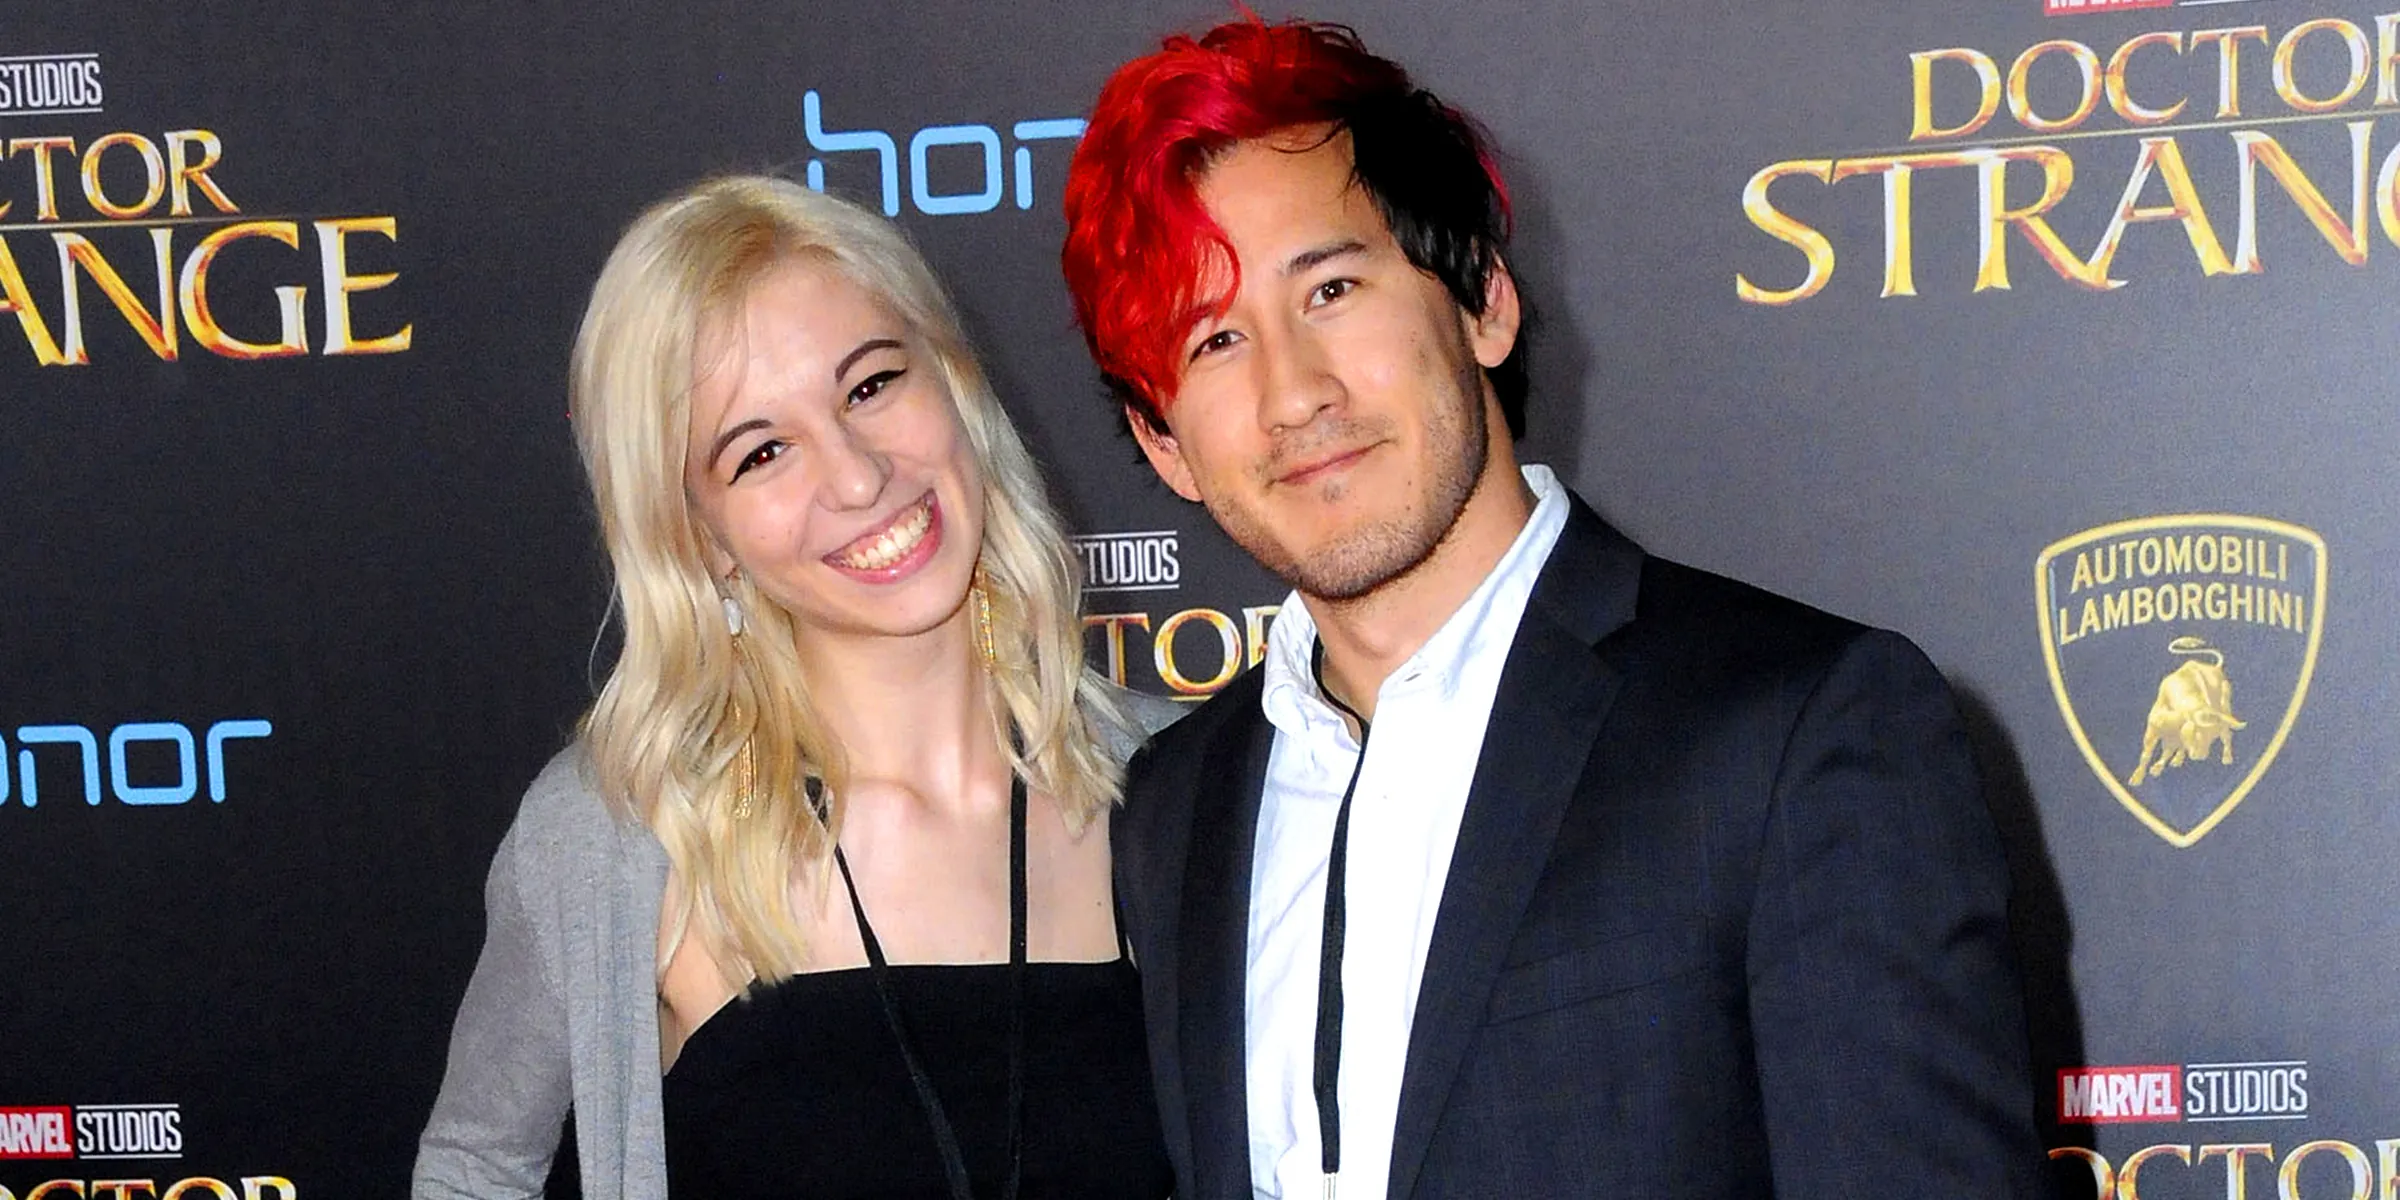 Amy Nelson and Markiplier